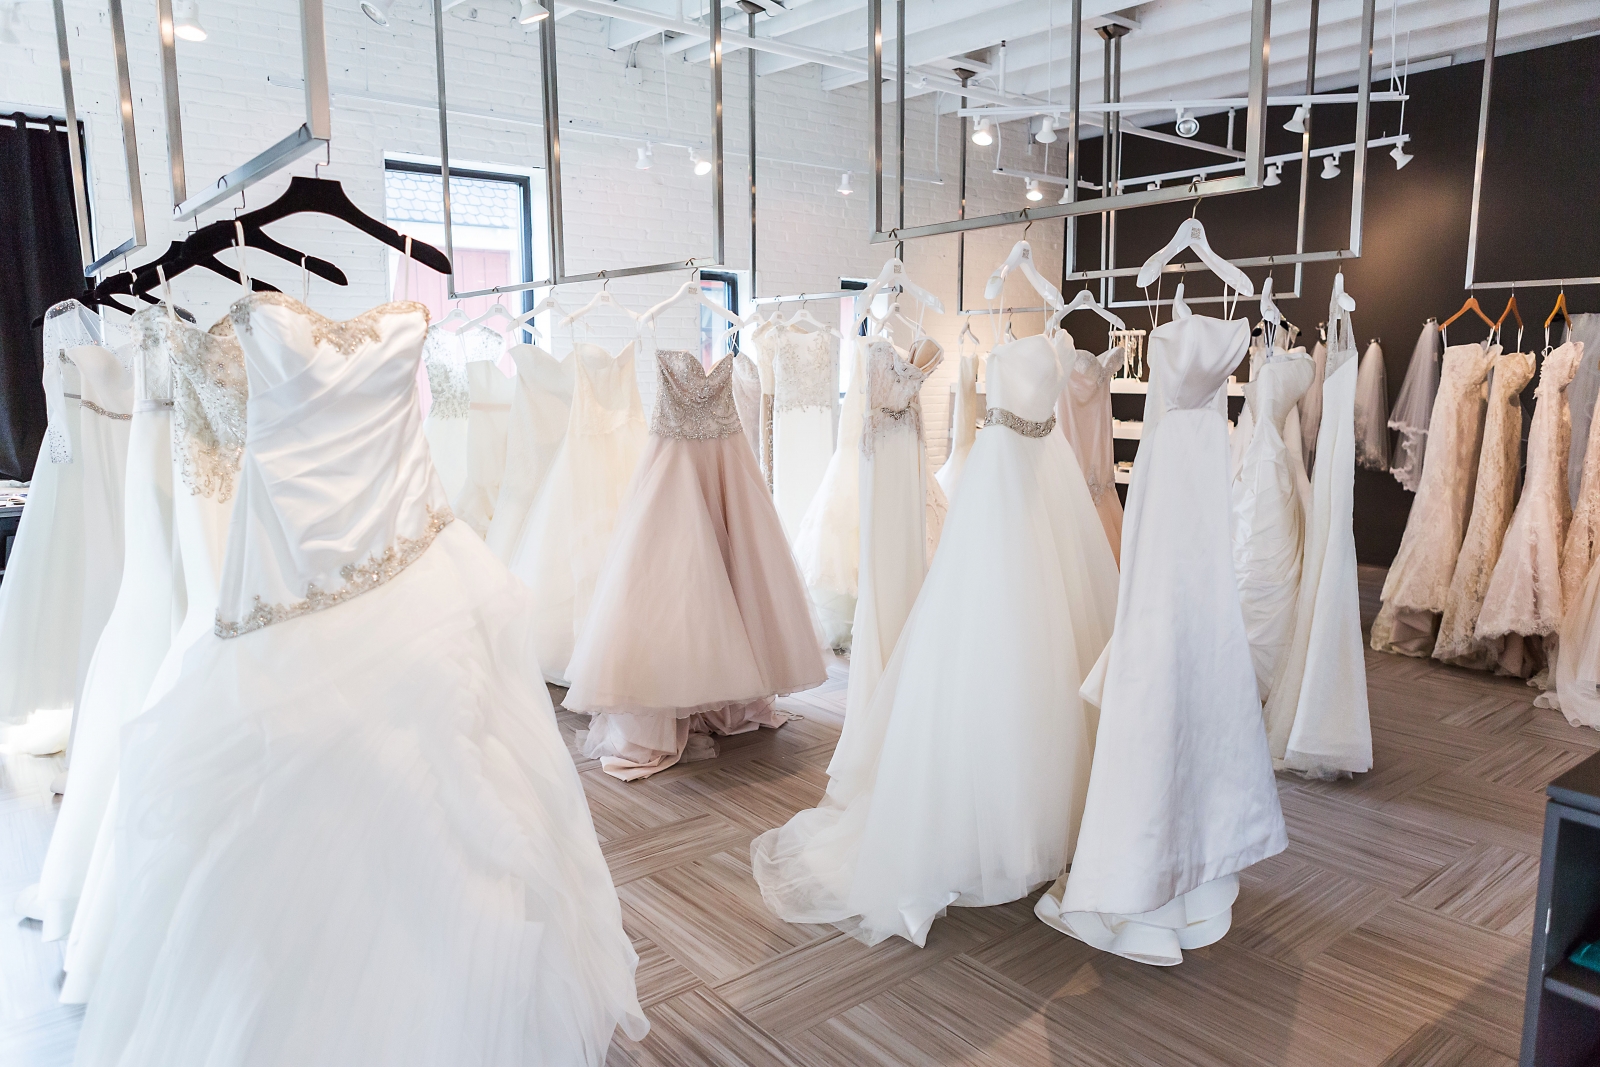 Top Wedding Dress Shopping in 2023 The ultimate guide 